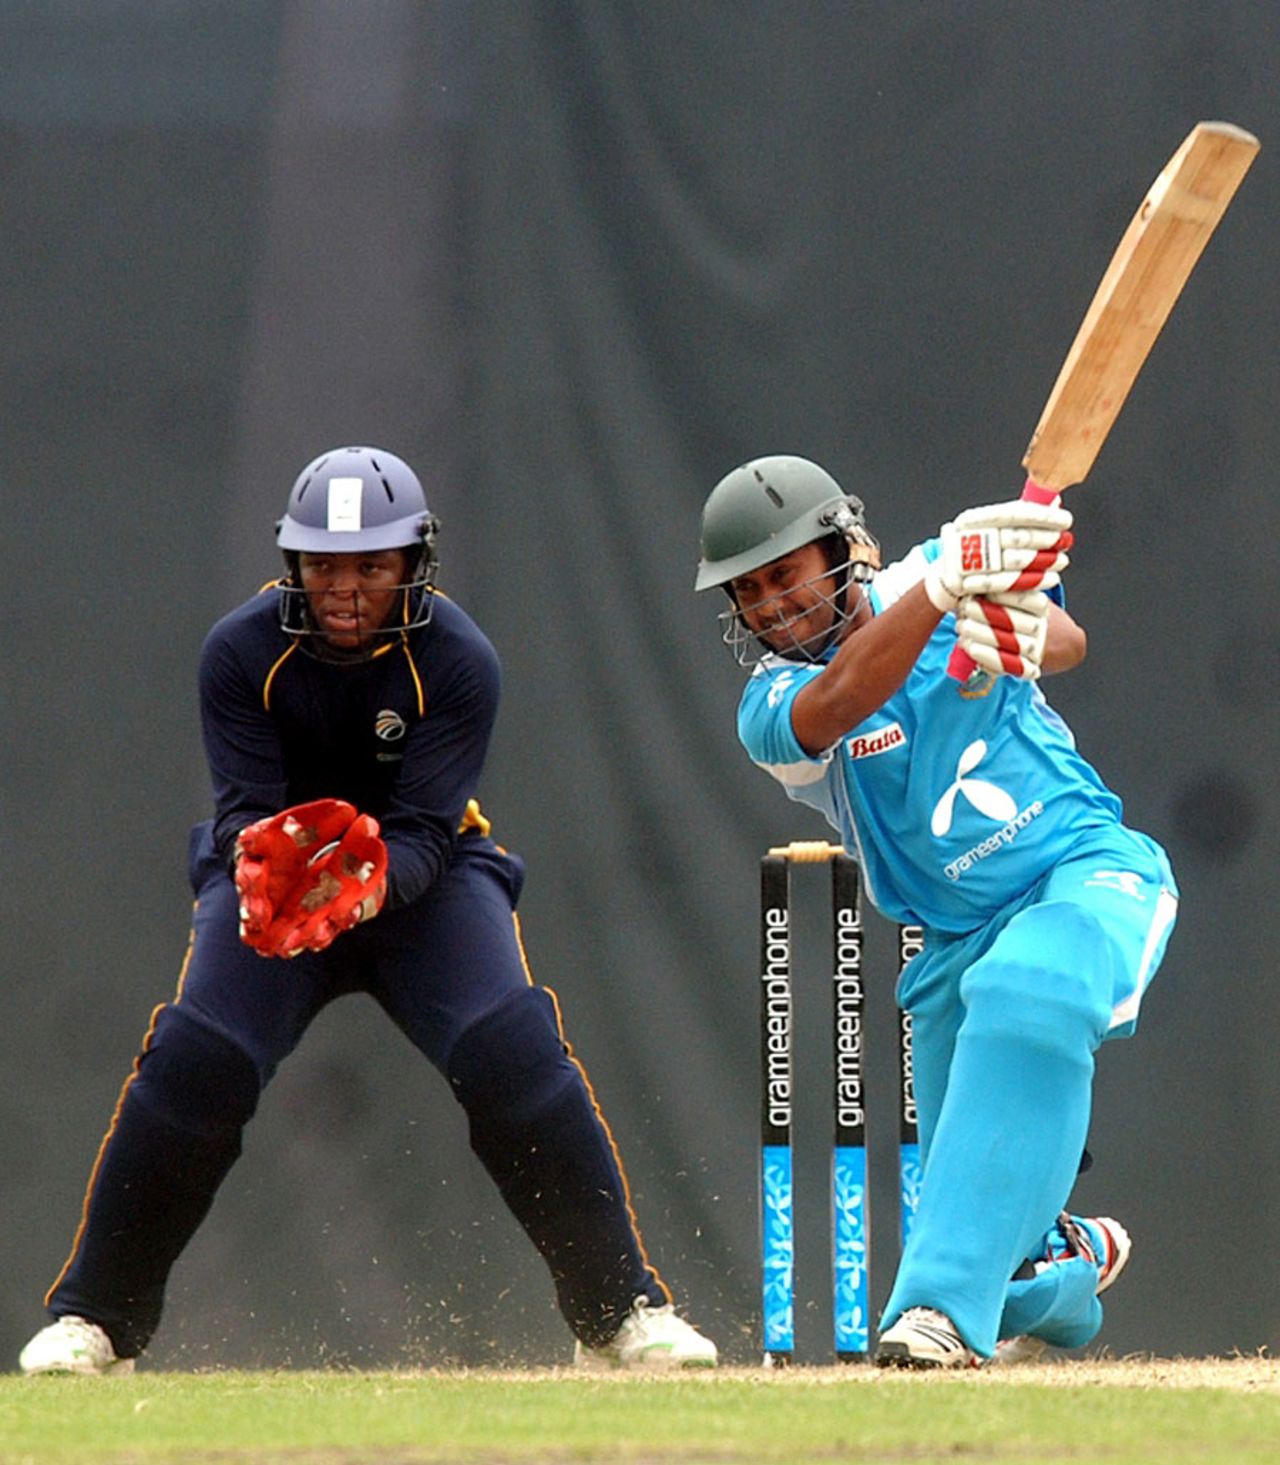 BCB NCA captain Mohammad Mithun hits through the covers, Academy Cup, Bangladesh Cricket Board National Cricket Academy v South African National Cricket Academy, 1st Twenty20, Mirpur, May 5, 2011